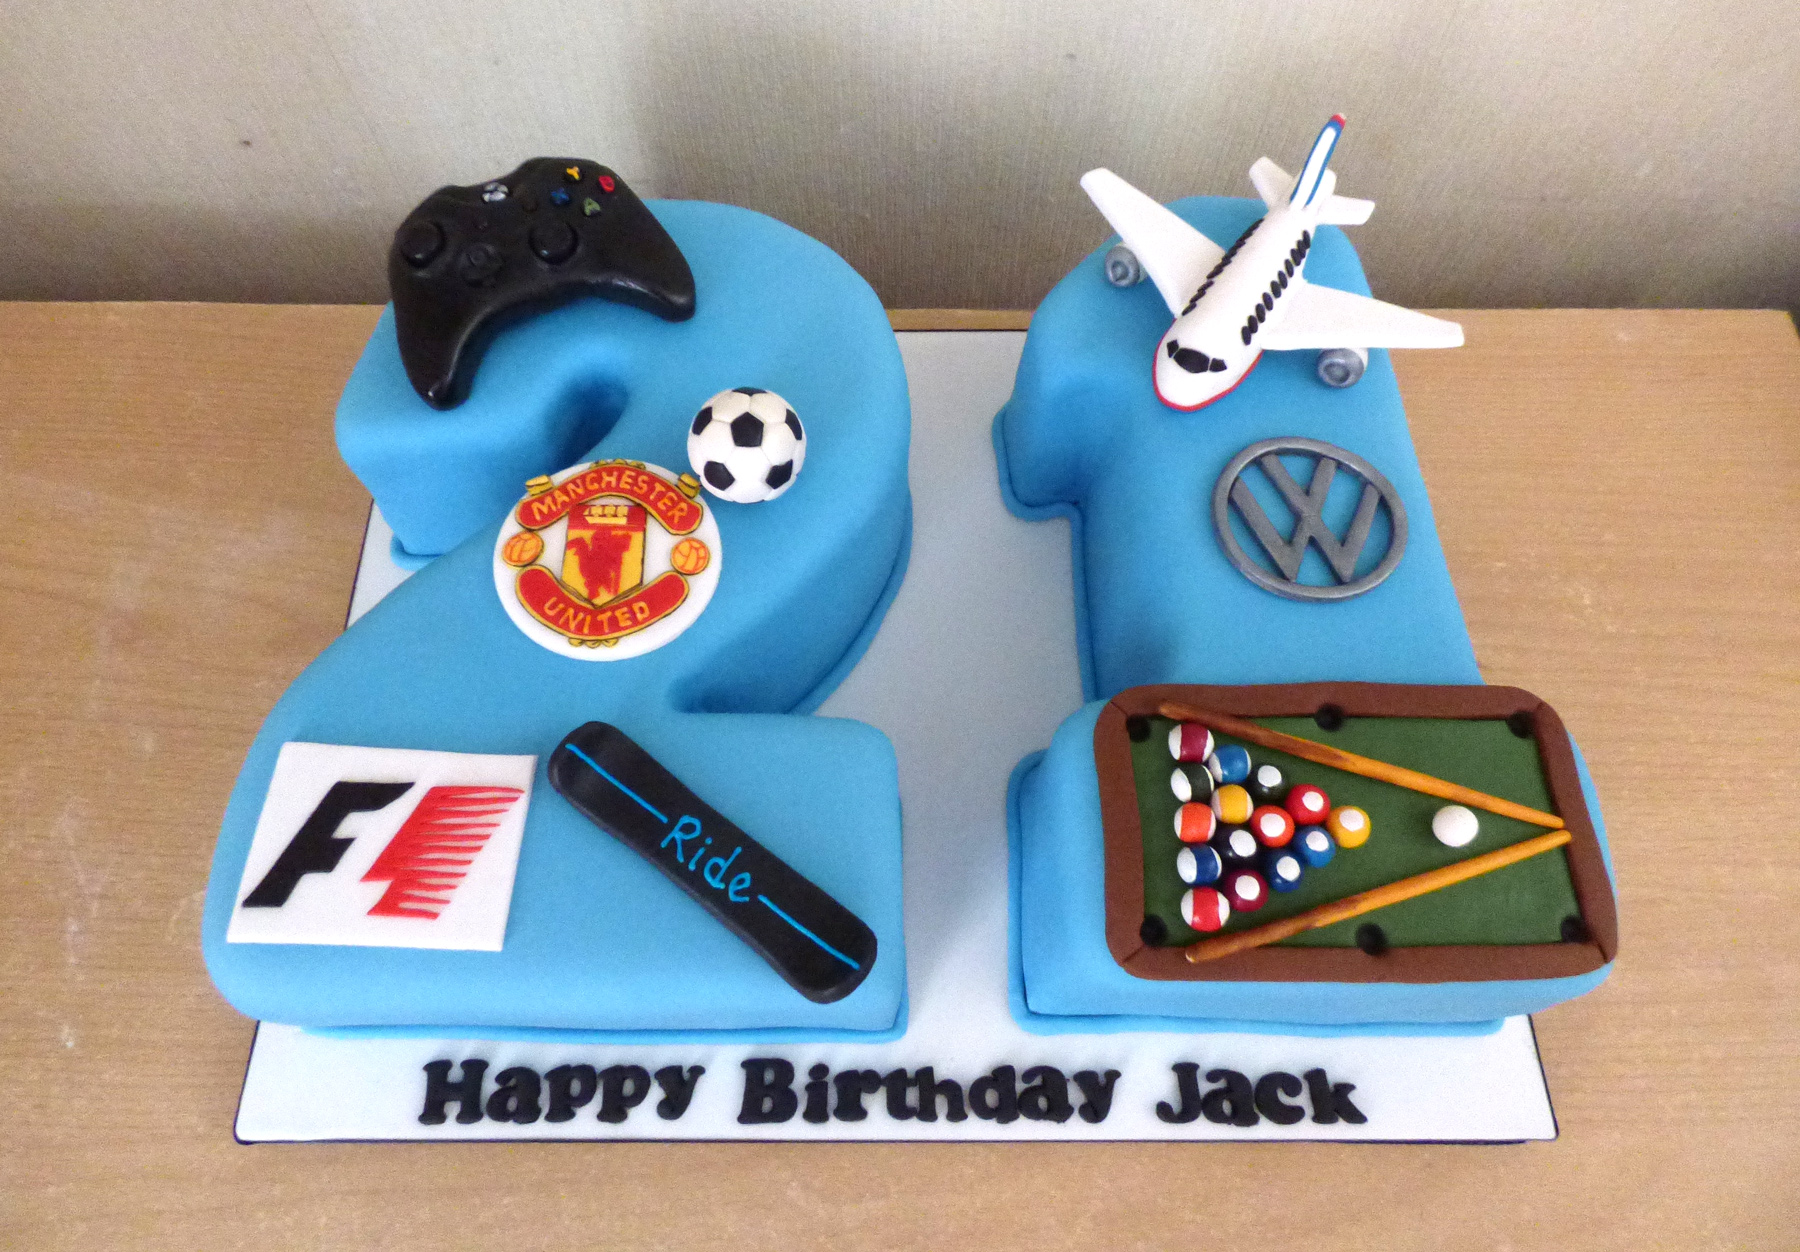 Deliciously Delivered or Collected: Order Birthday Cakes Online Today!